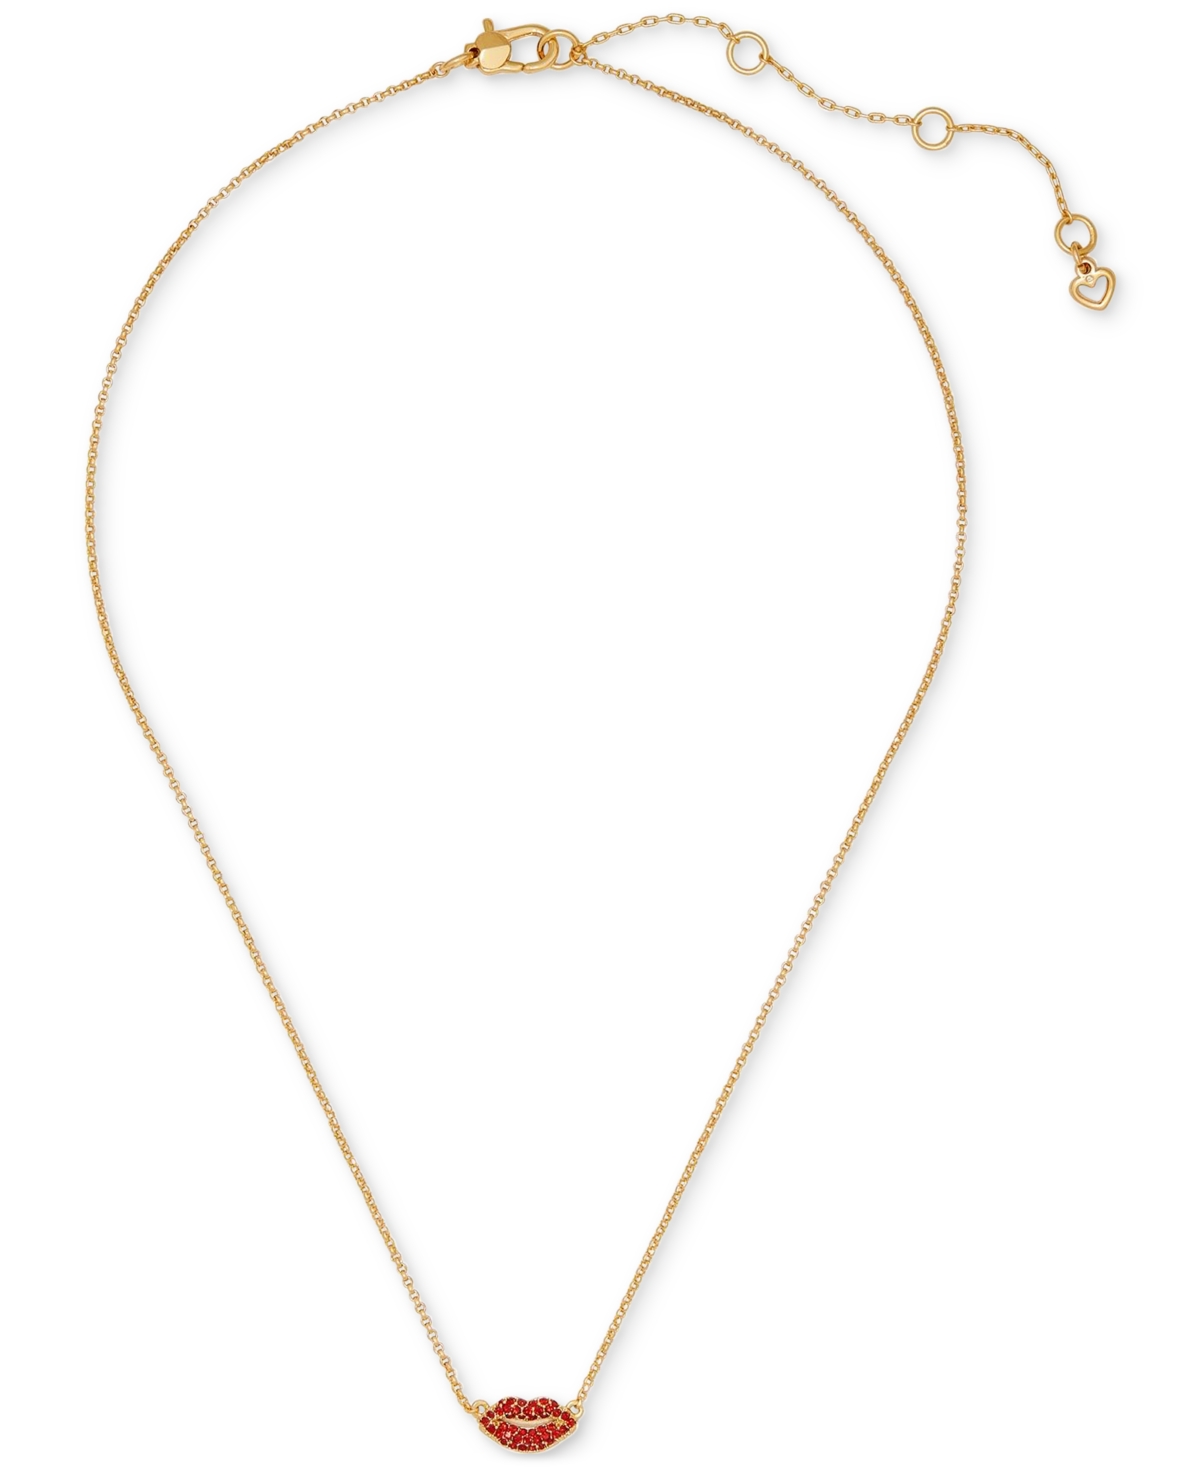 Gold-Tone Crystal Lip Pendant Necklace, 16" + 3" extender - Red.